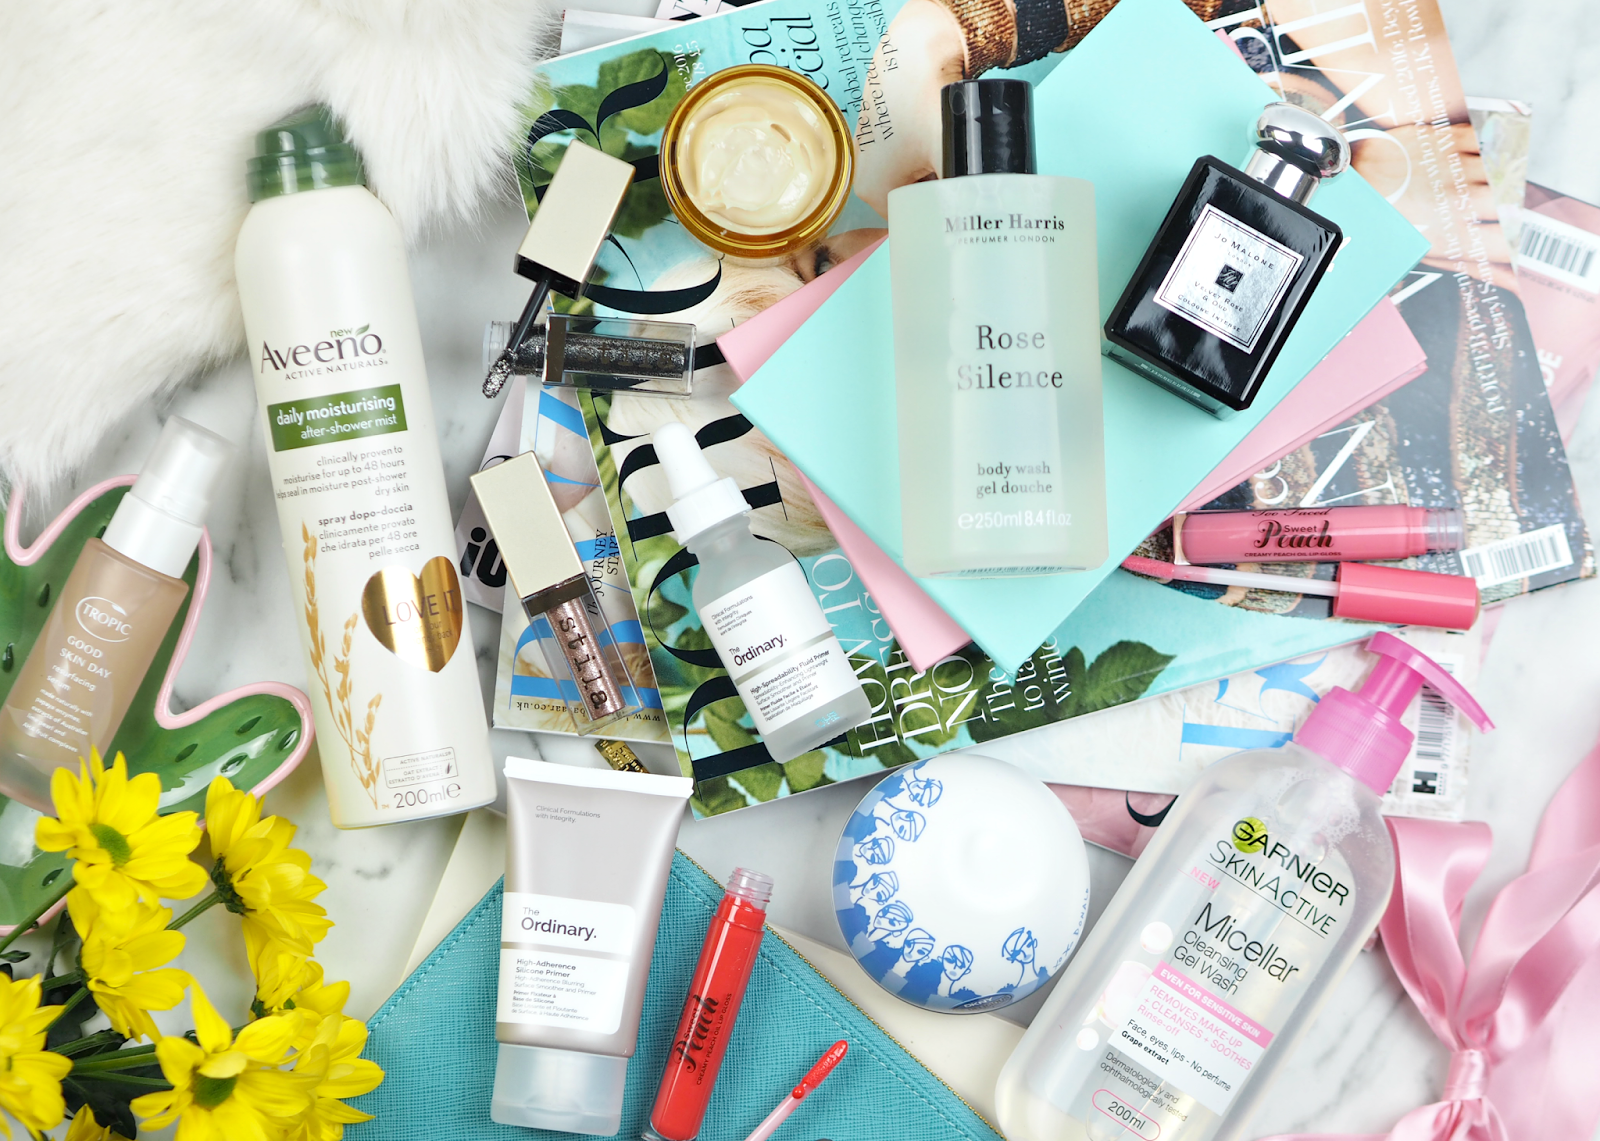 New In This Week: All The Beauty Bits I'm Excited To Try